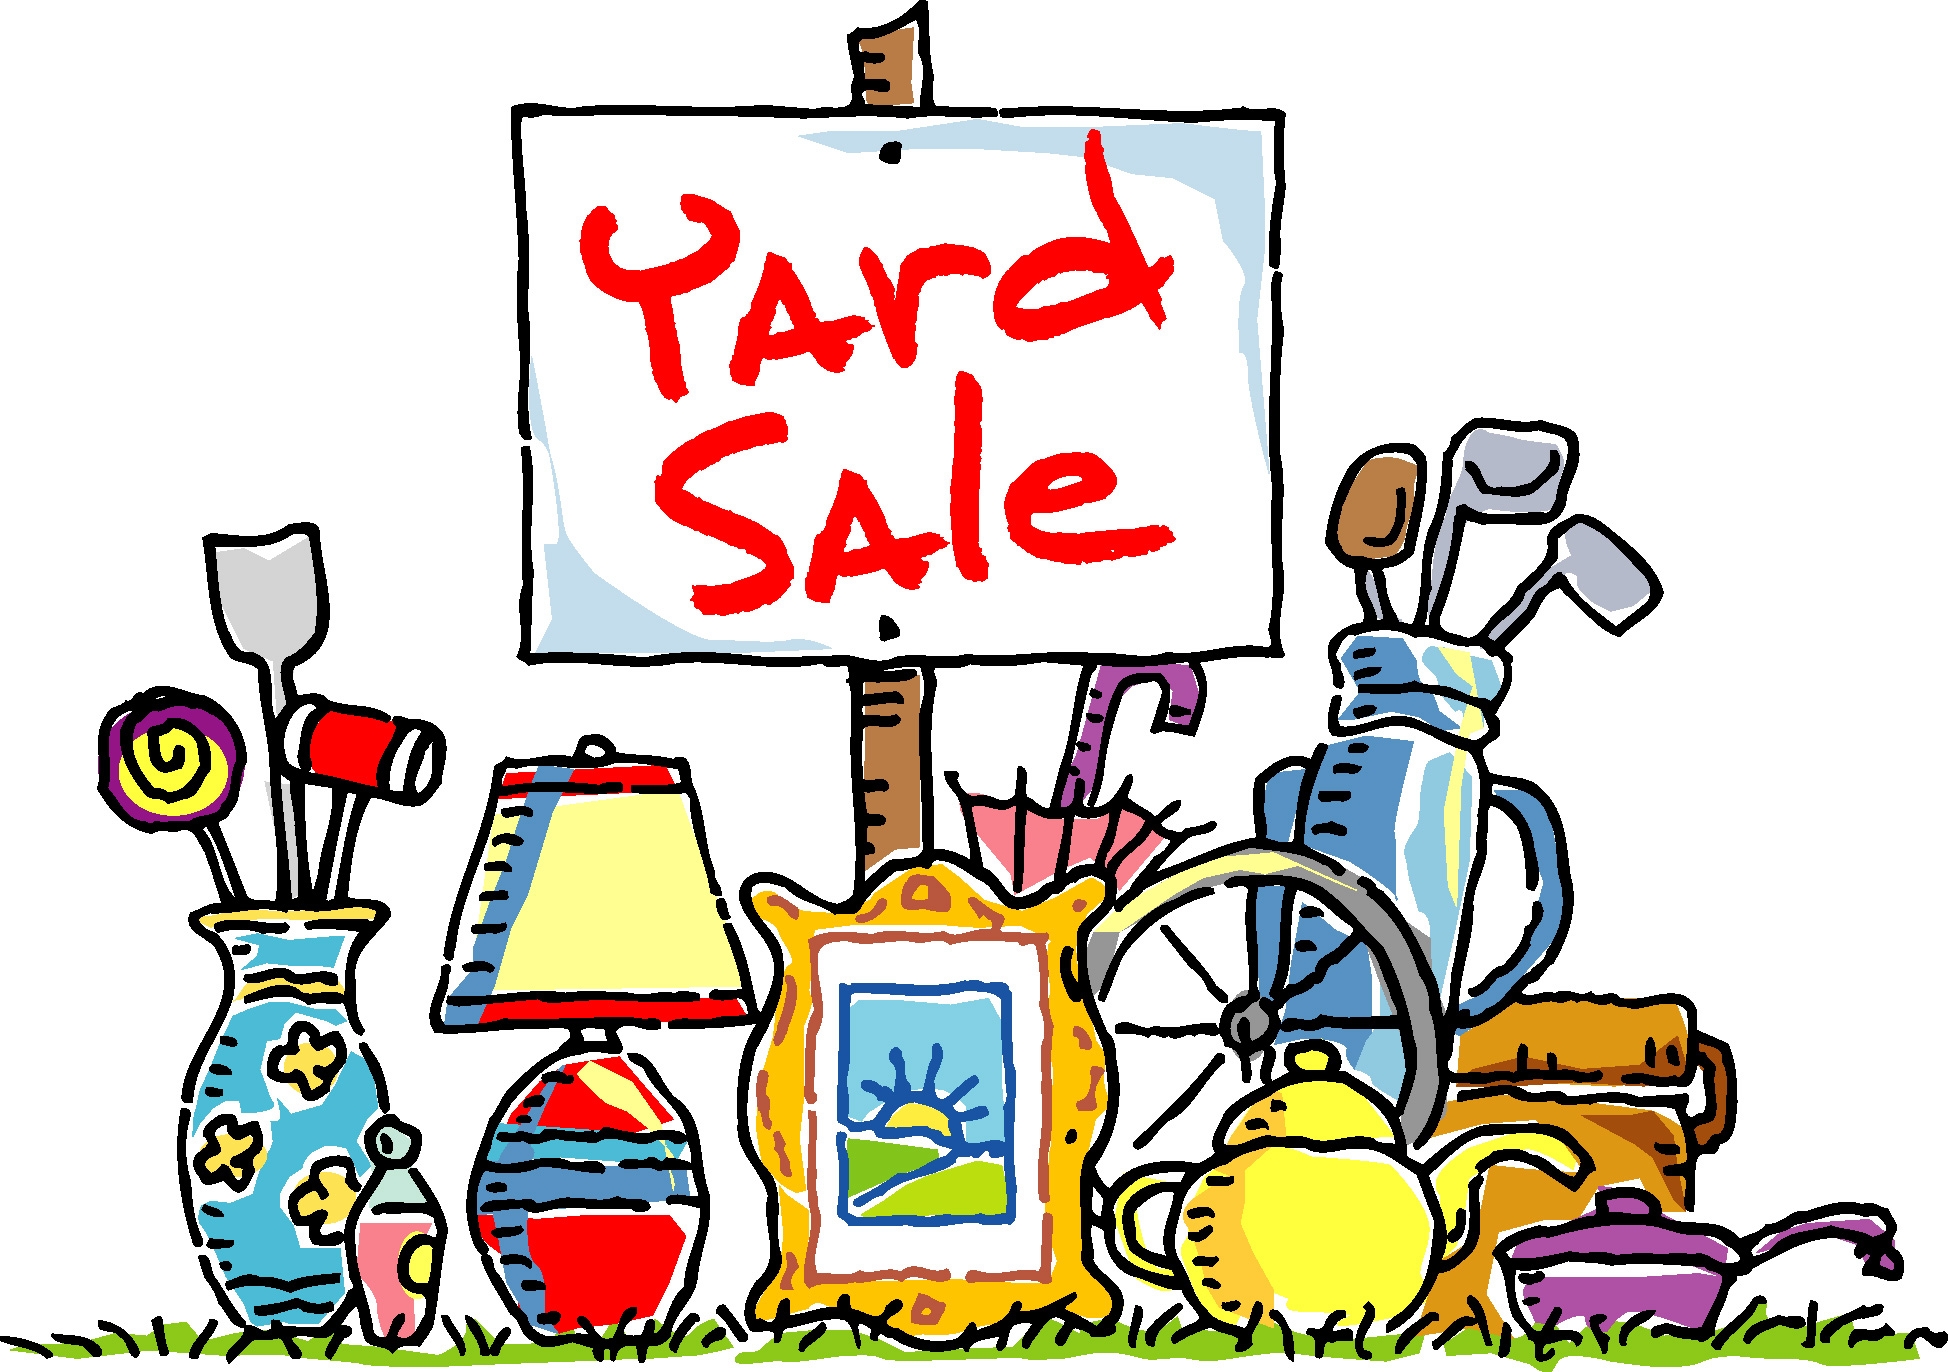 Yard sale clipart free 4 » Clipart Station.